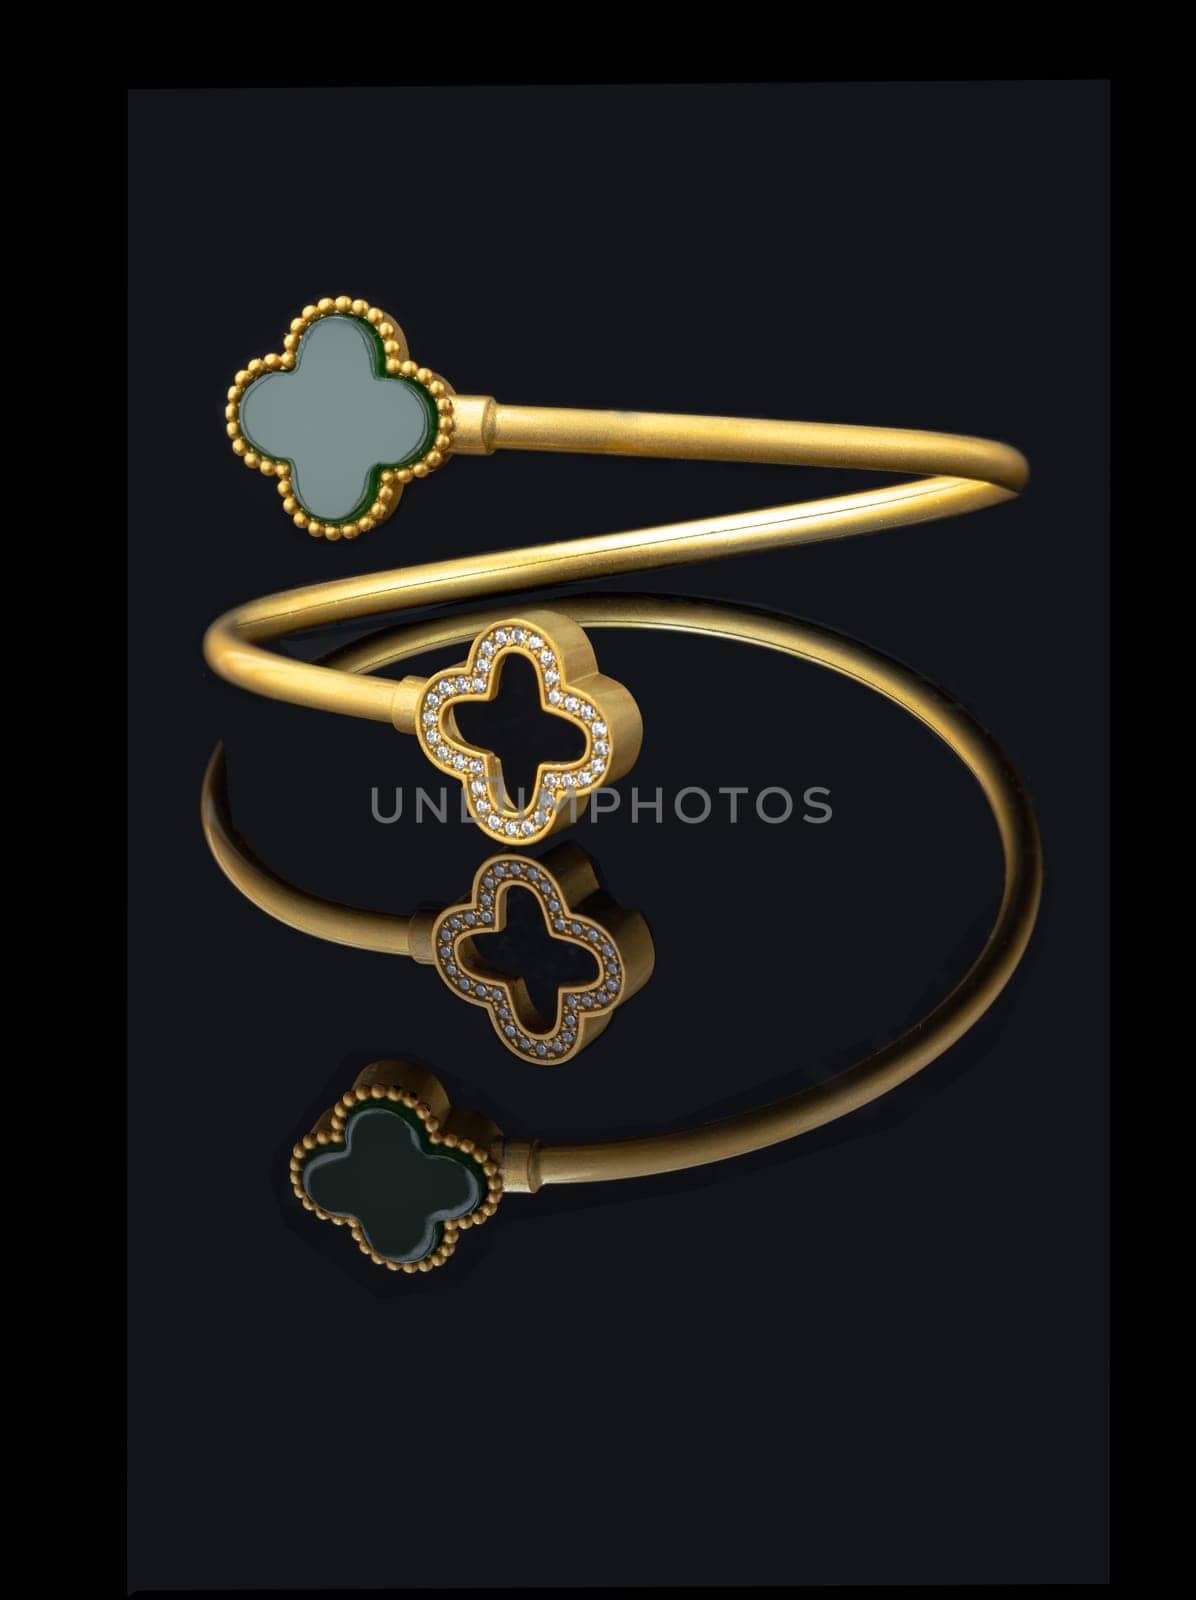 Romantic Beautiful Gold Bracelet with Jade and Many Precious Diamonds Shown on a Black Reflection Background.  by tosirikul